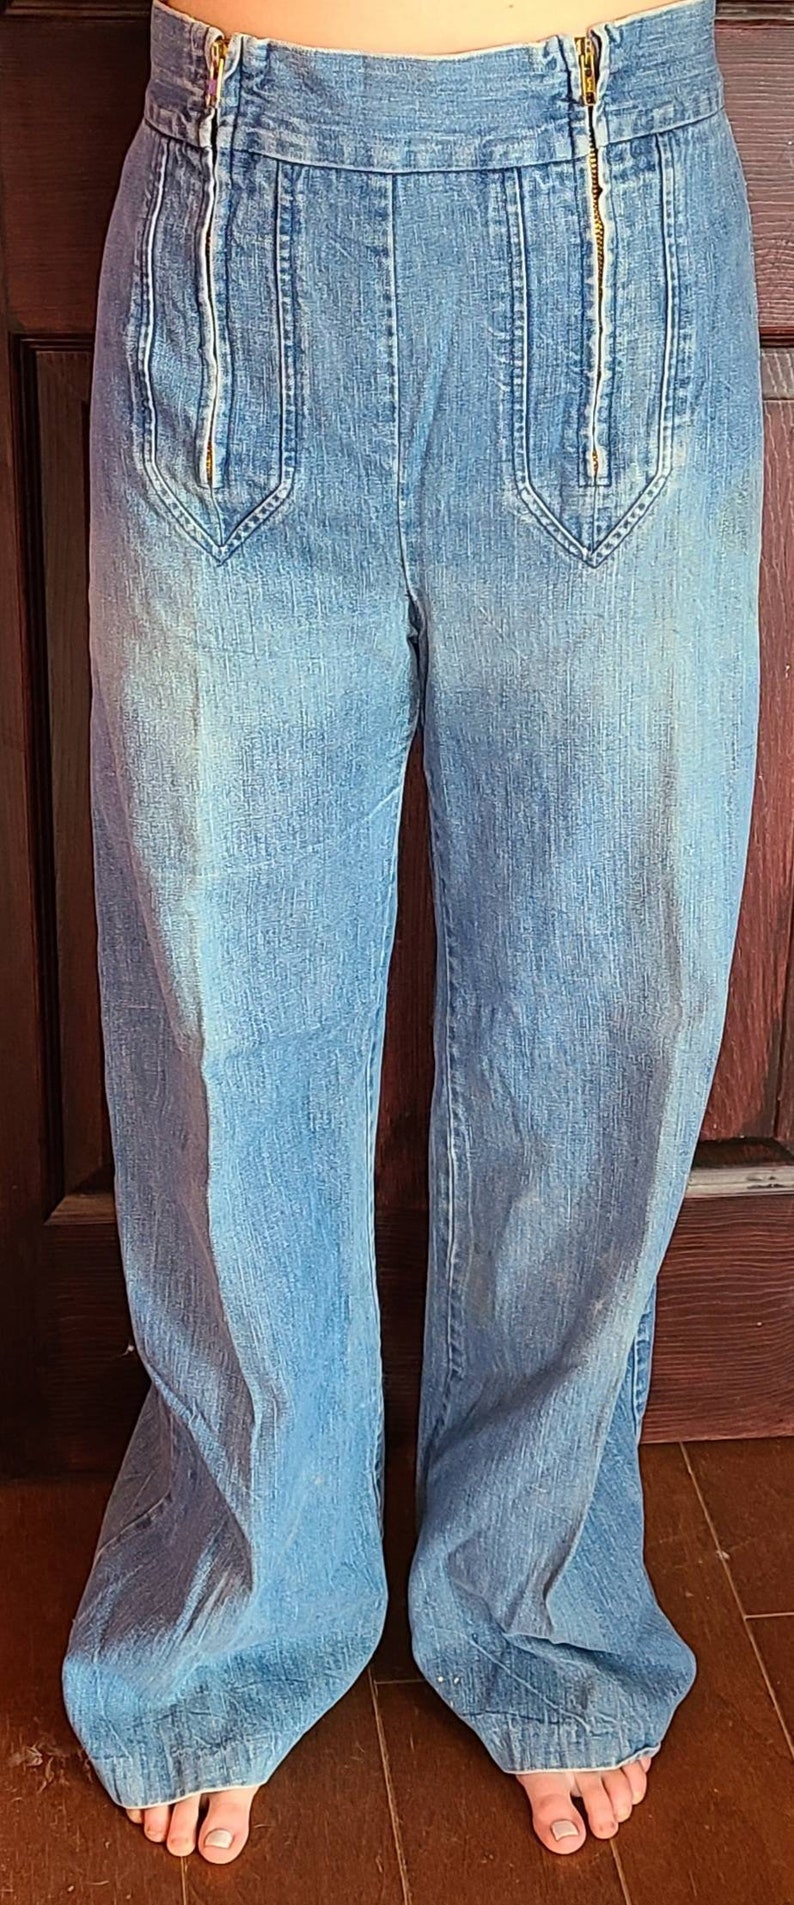 Vintage Bell Bottom jeans, with Really cute double zipper in the front. Size 13. image 1